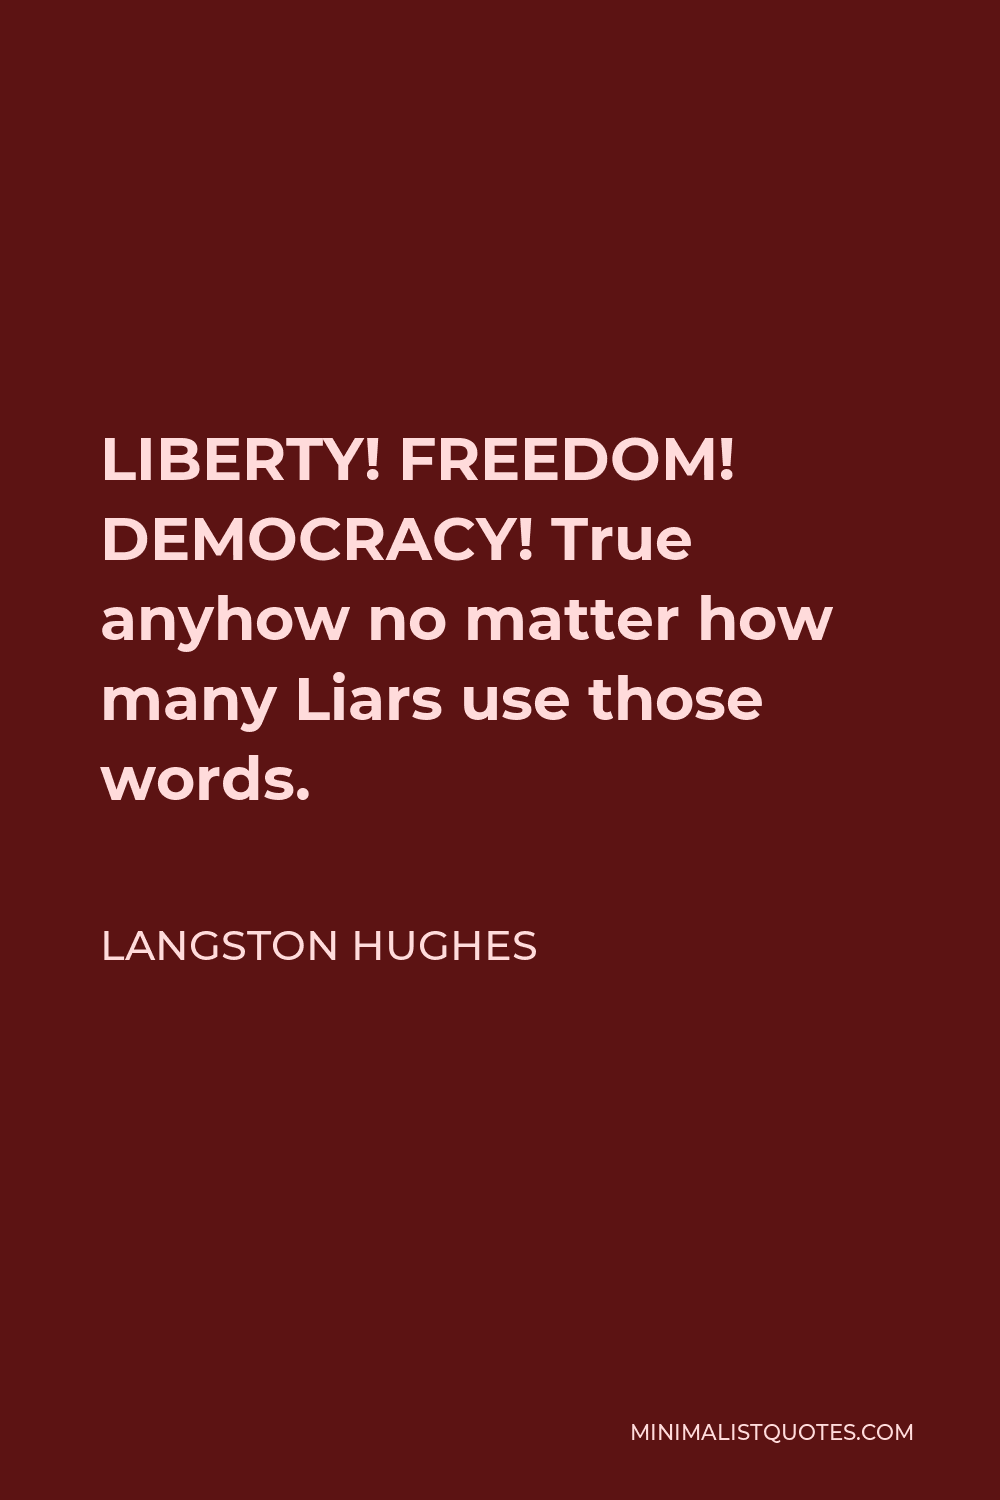 Langston Hughes Quote - LIBERTY! FREEDOM! DEMOCRACY! True anyhow no matter how many Liars use those words.